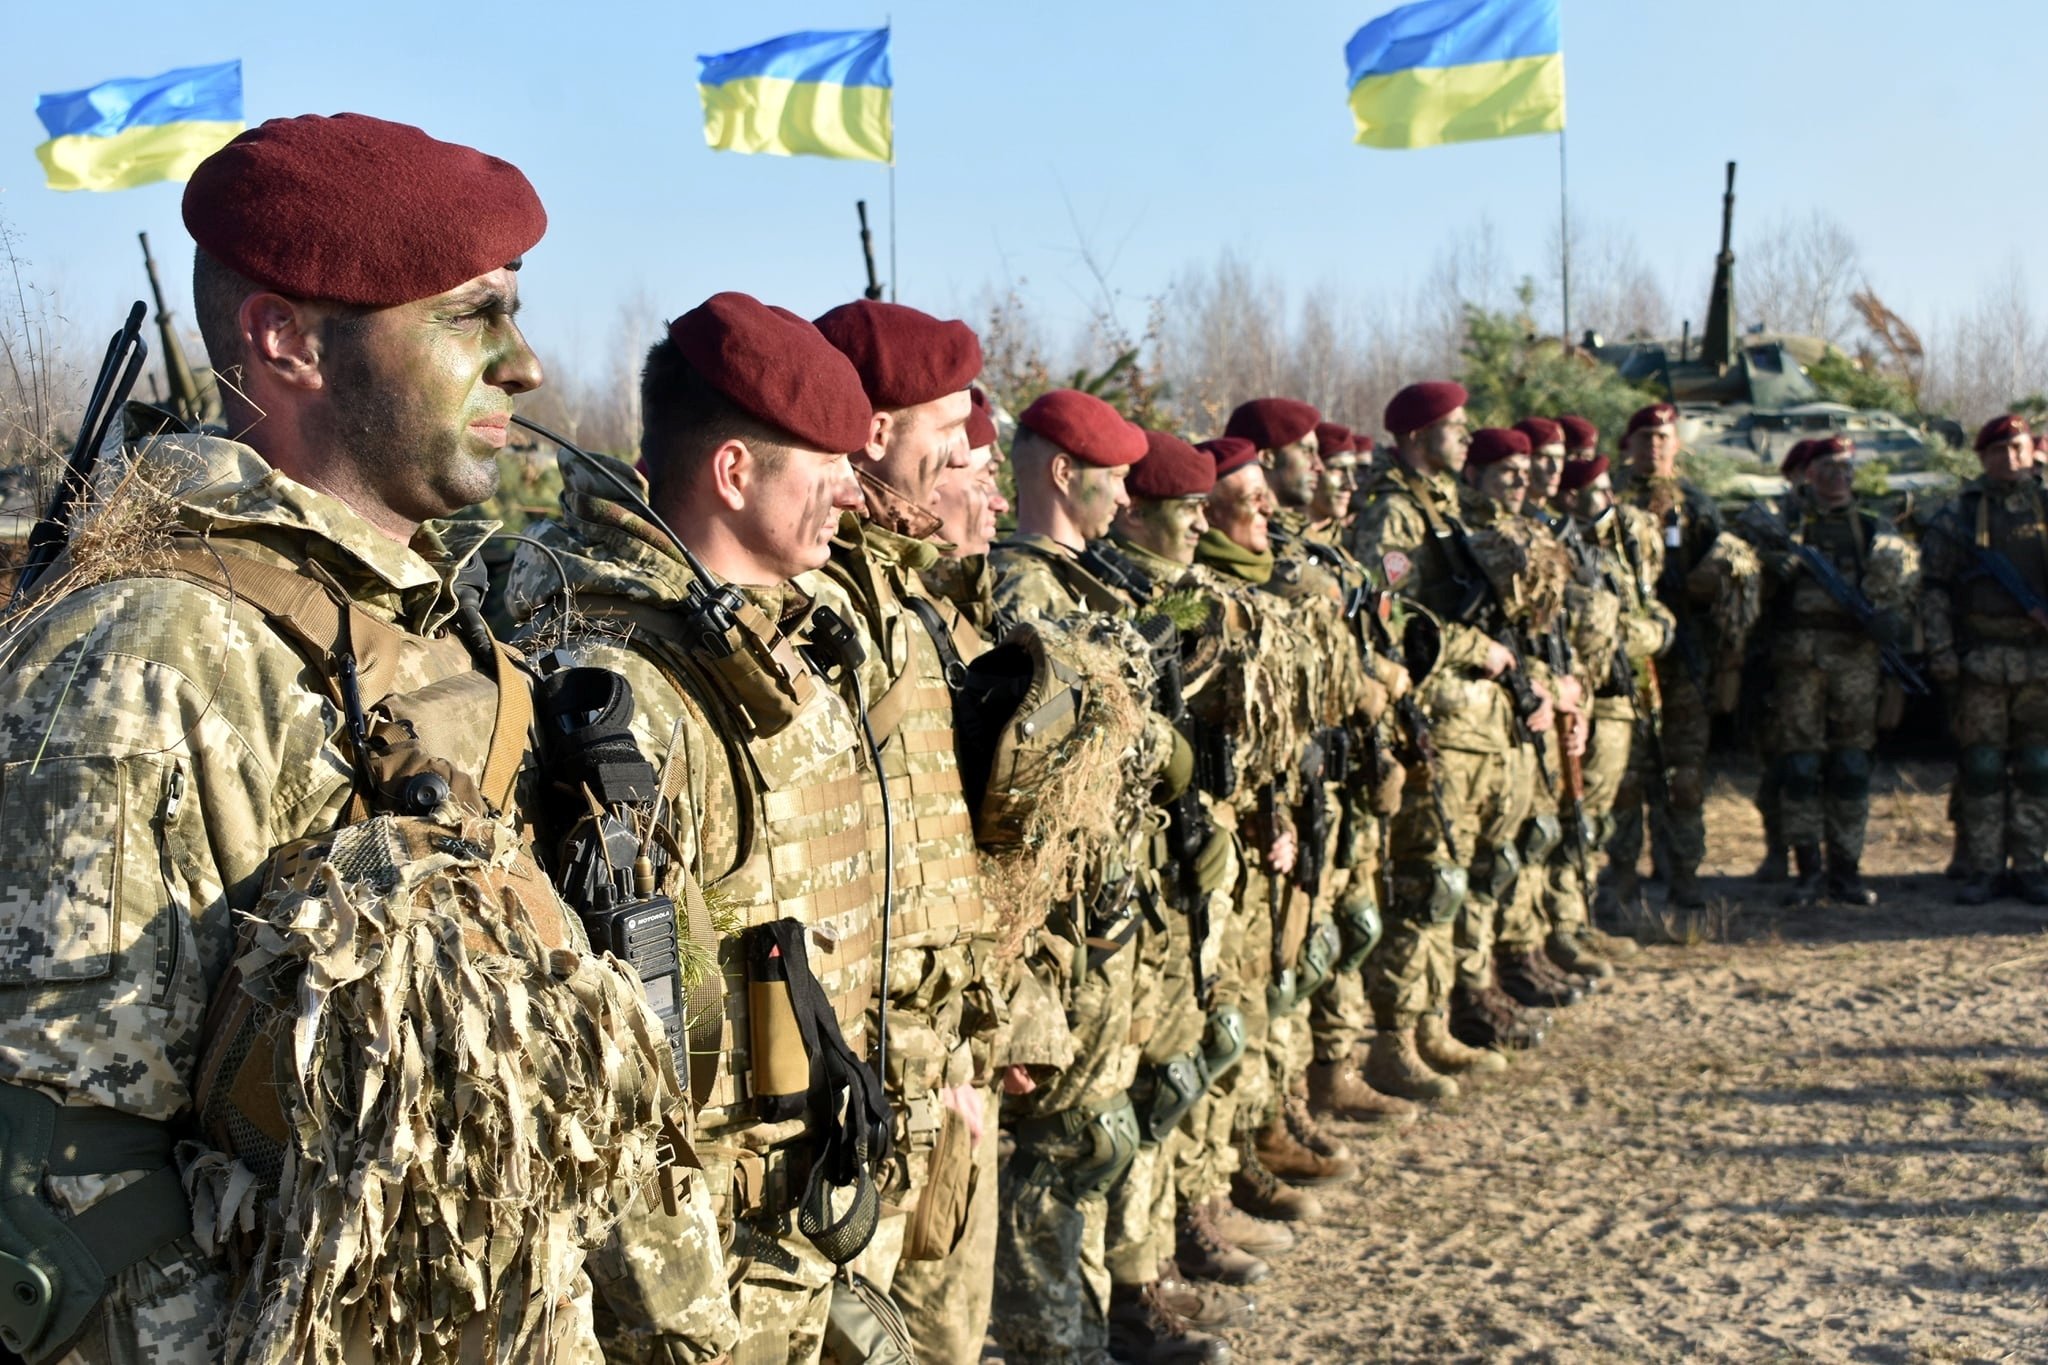 Ukraine holds military drill amid rising tensions with Russia | Daily Sabah